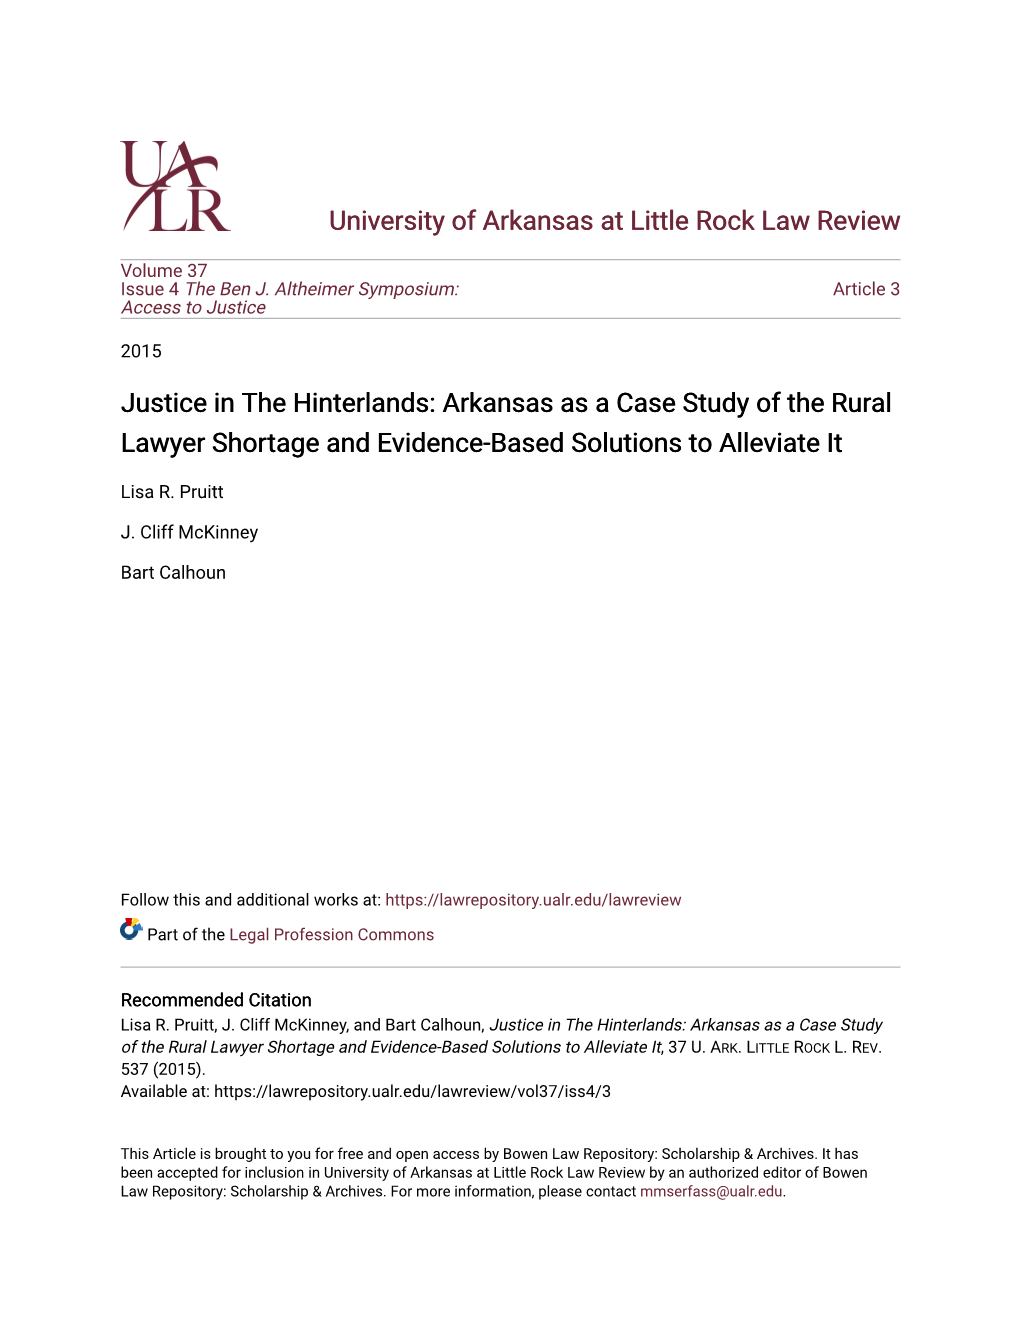 Arkansas As a Case Study of the Rural Lawyer Shortage and Evidence-Based Solutions to Alleviate It